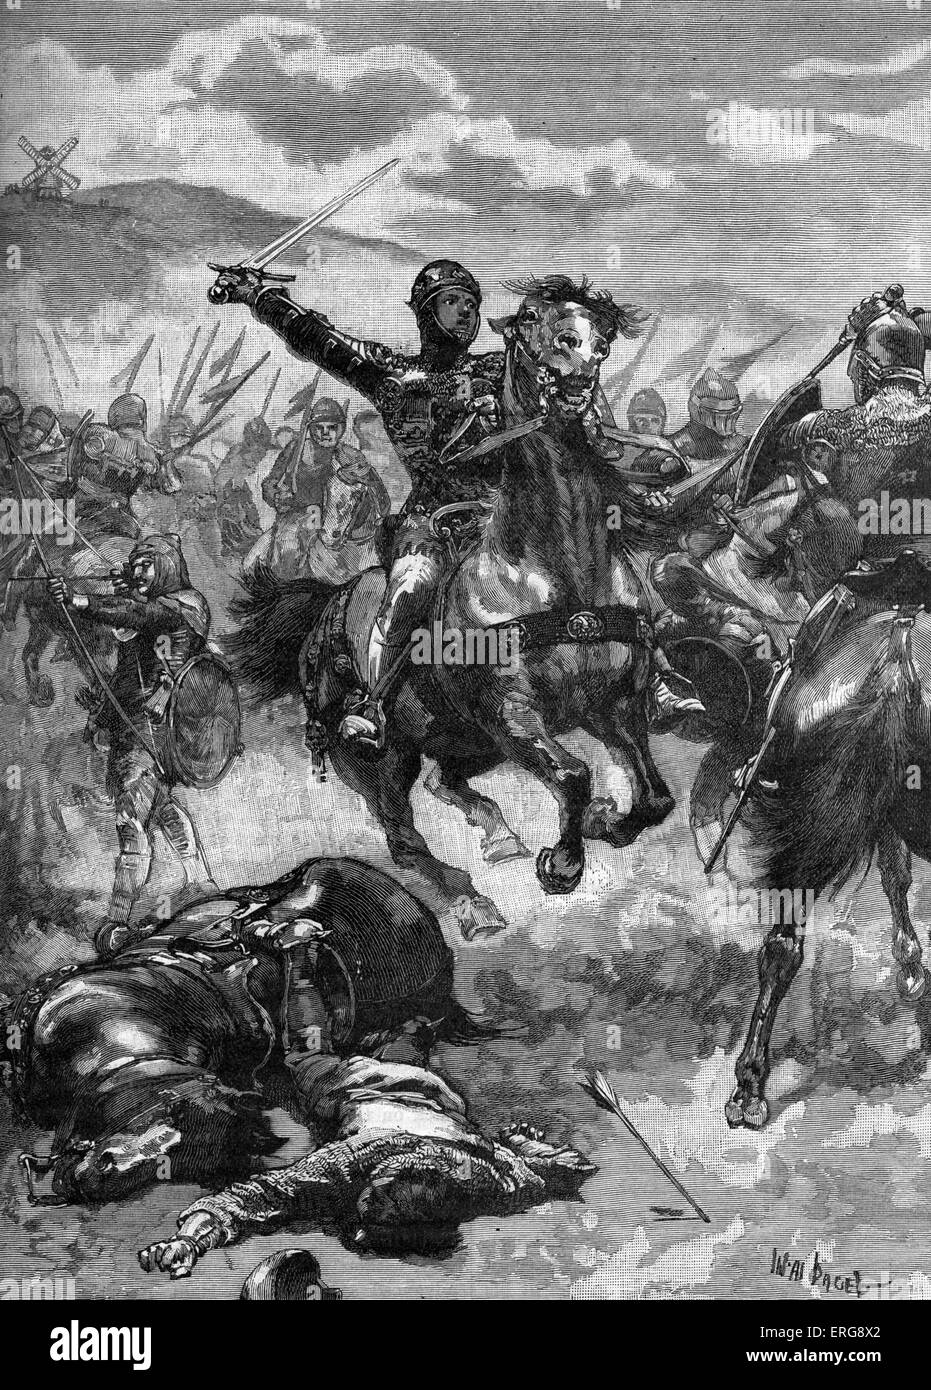 Edward, the Black Prince at the Battle of Crécy, 26 August 1346, France. Important battle in the Hundred Years ' War - English Stock Photo